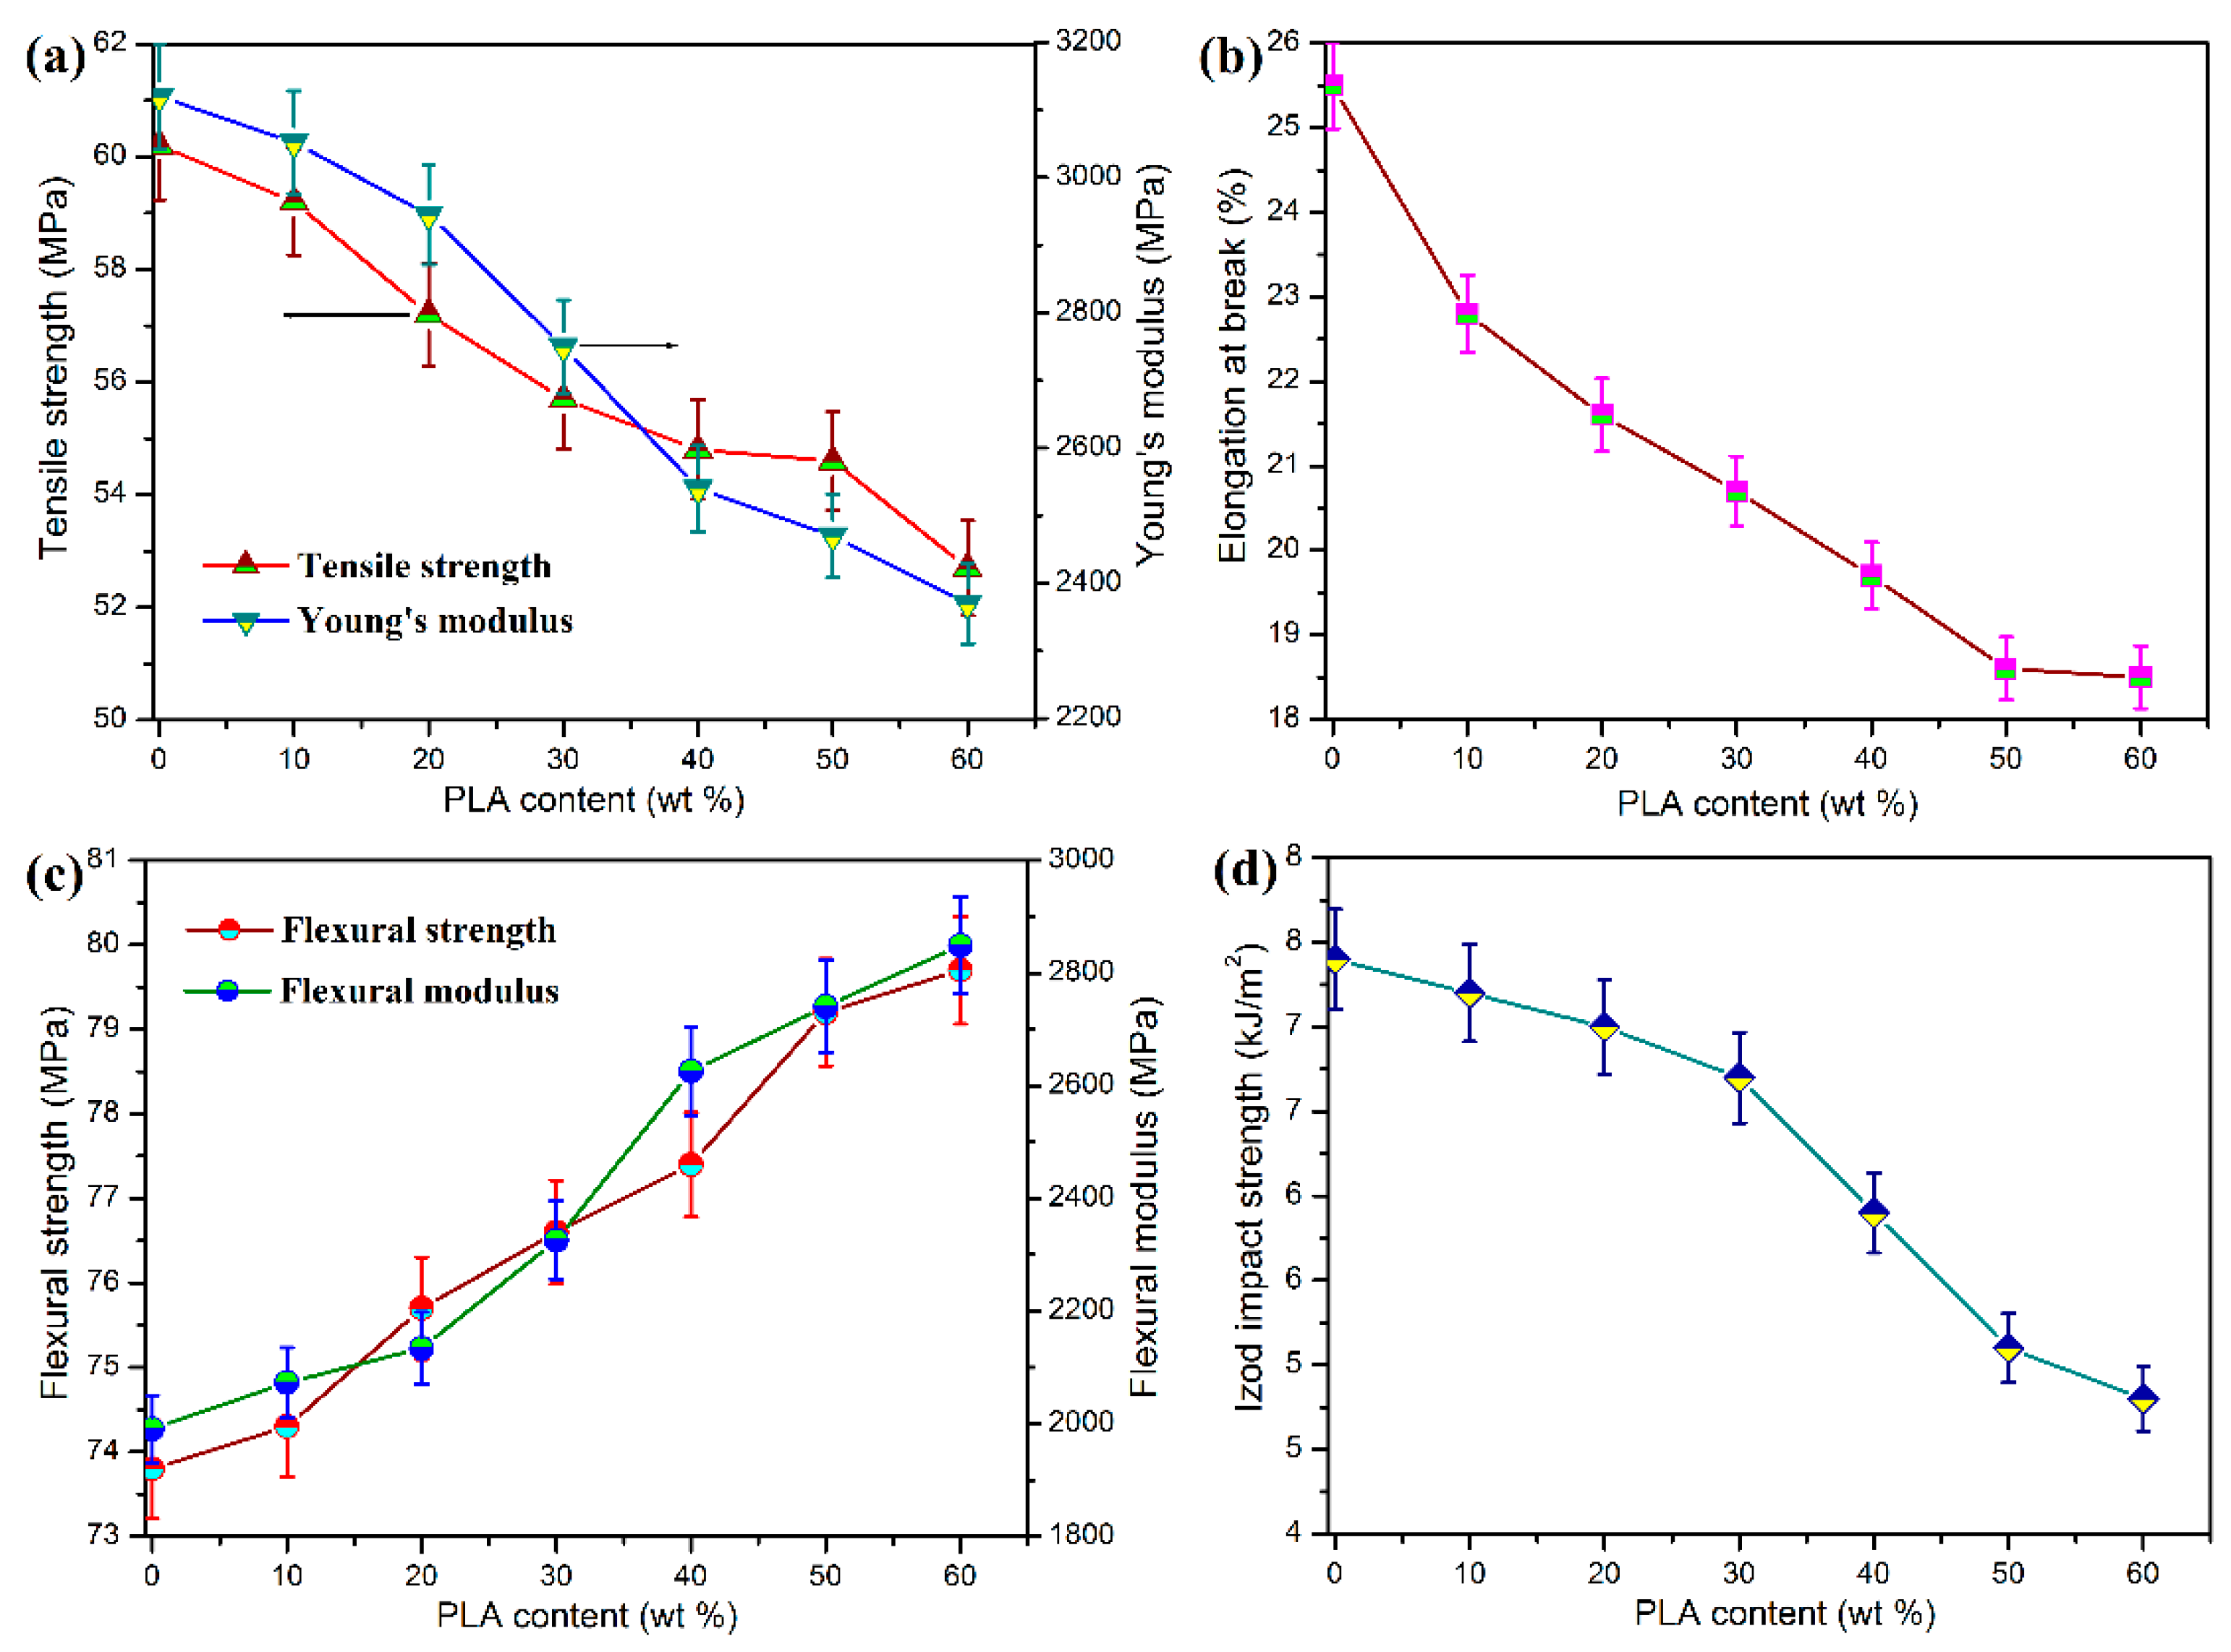 Polymers | Free Full-Text | Development of Polyoxymethylene/Polylactide Blends for a Potentially Biodegradable Material: Lifespan Prediction, and Enzymatic Degradation Behavior | HTML